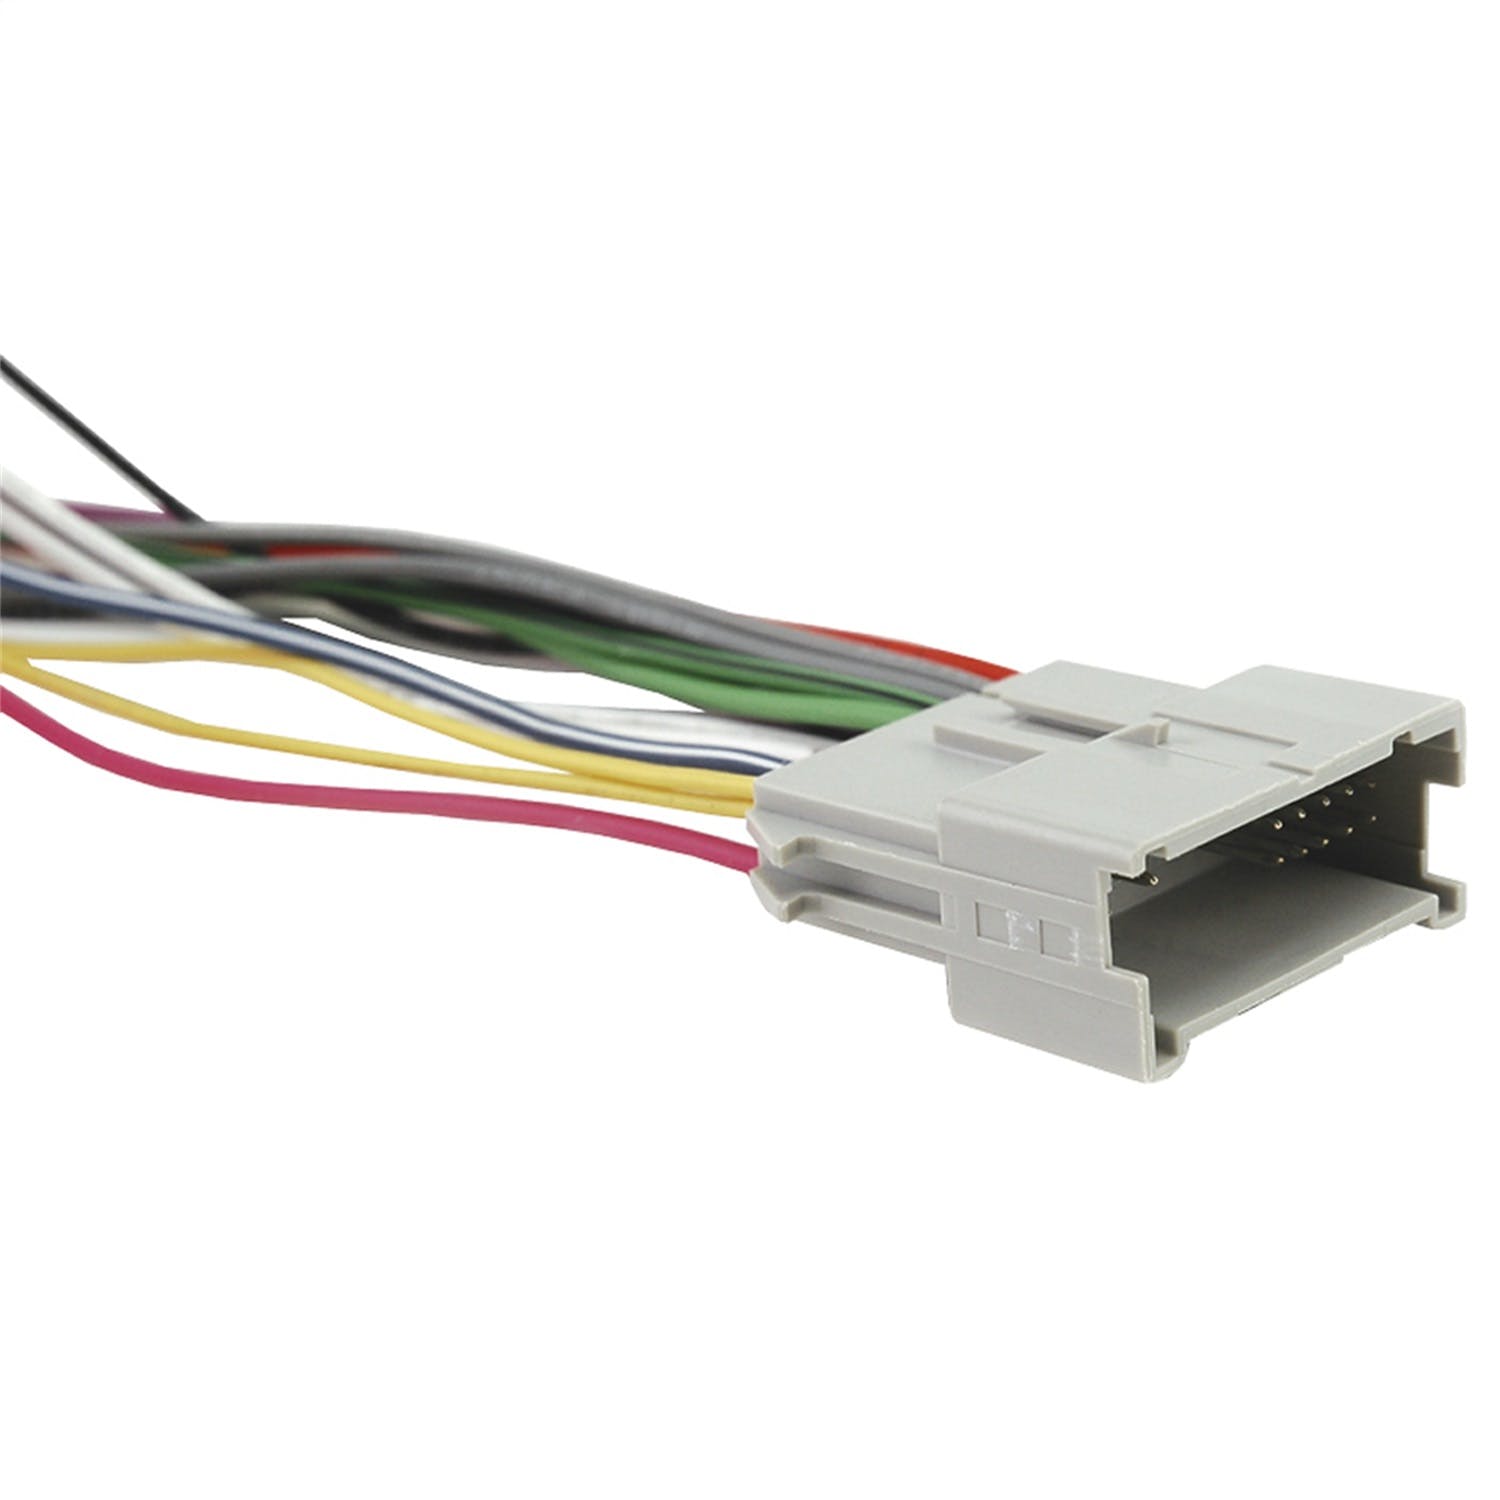 Metra Electronics GMRC-01 00-UP GM CL2 HARNESS INT CHIME